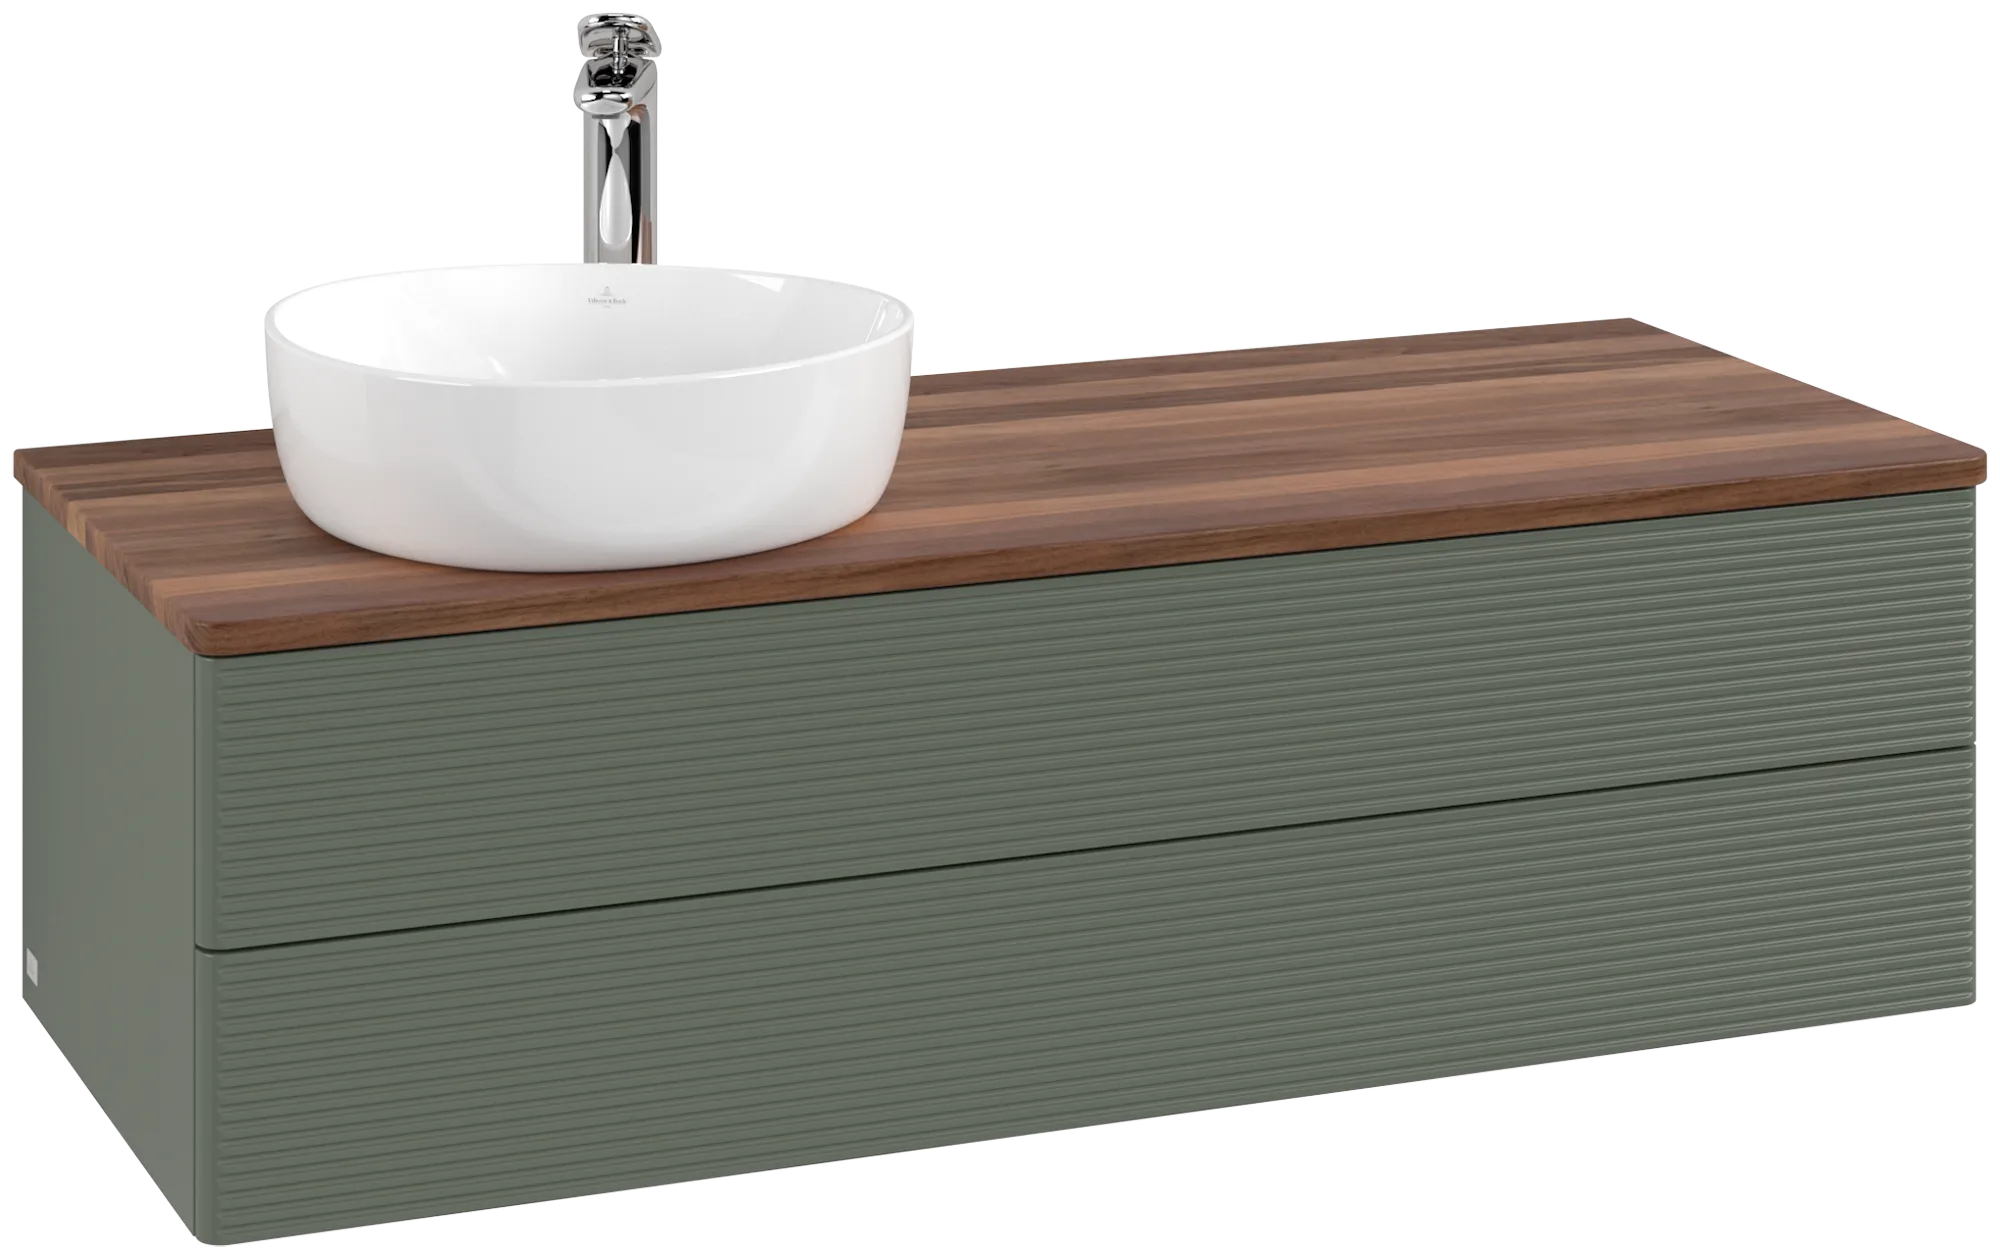 Obrázek VILLEROY BOCH Antao Vanity unit, with lighting, 2 pull-out compartments, 1200 x 360 x 500 mm, Front with grain texture, Leaf Green Matt Lacquer / Warm Walnut #L22152HL